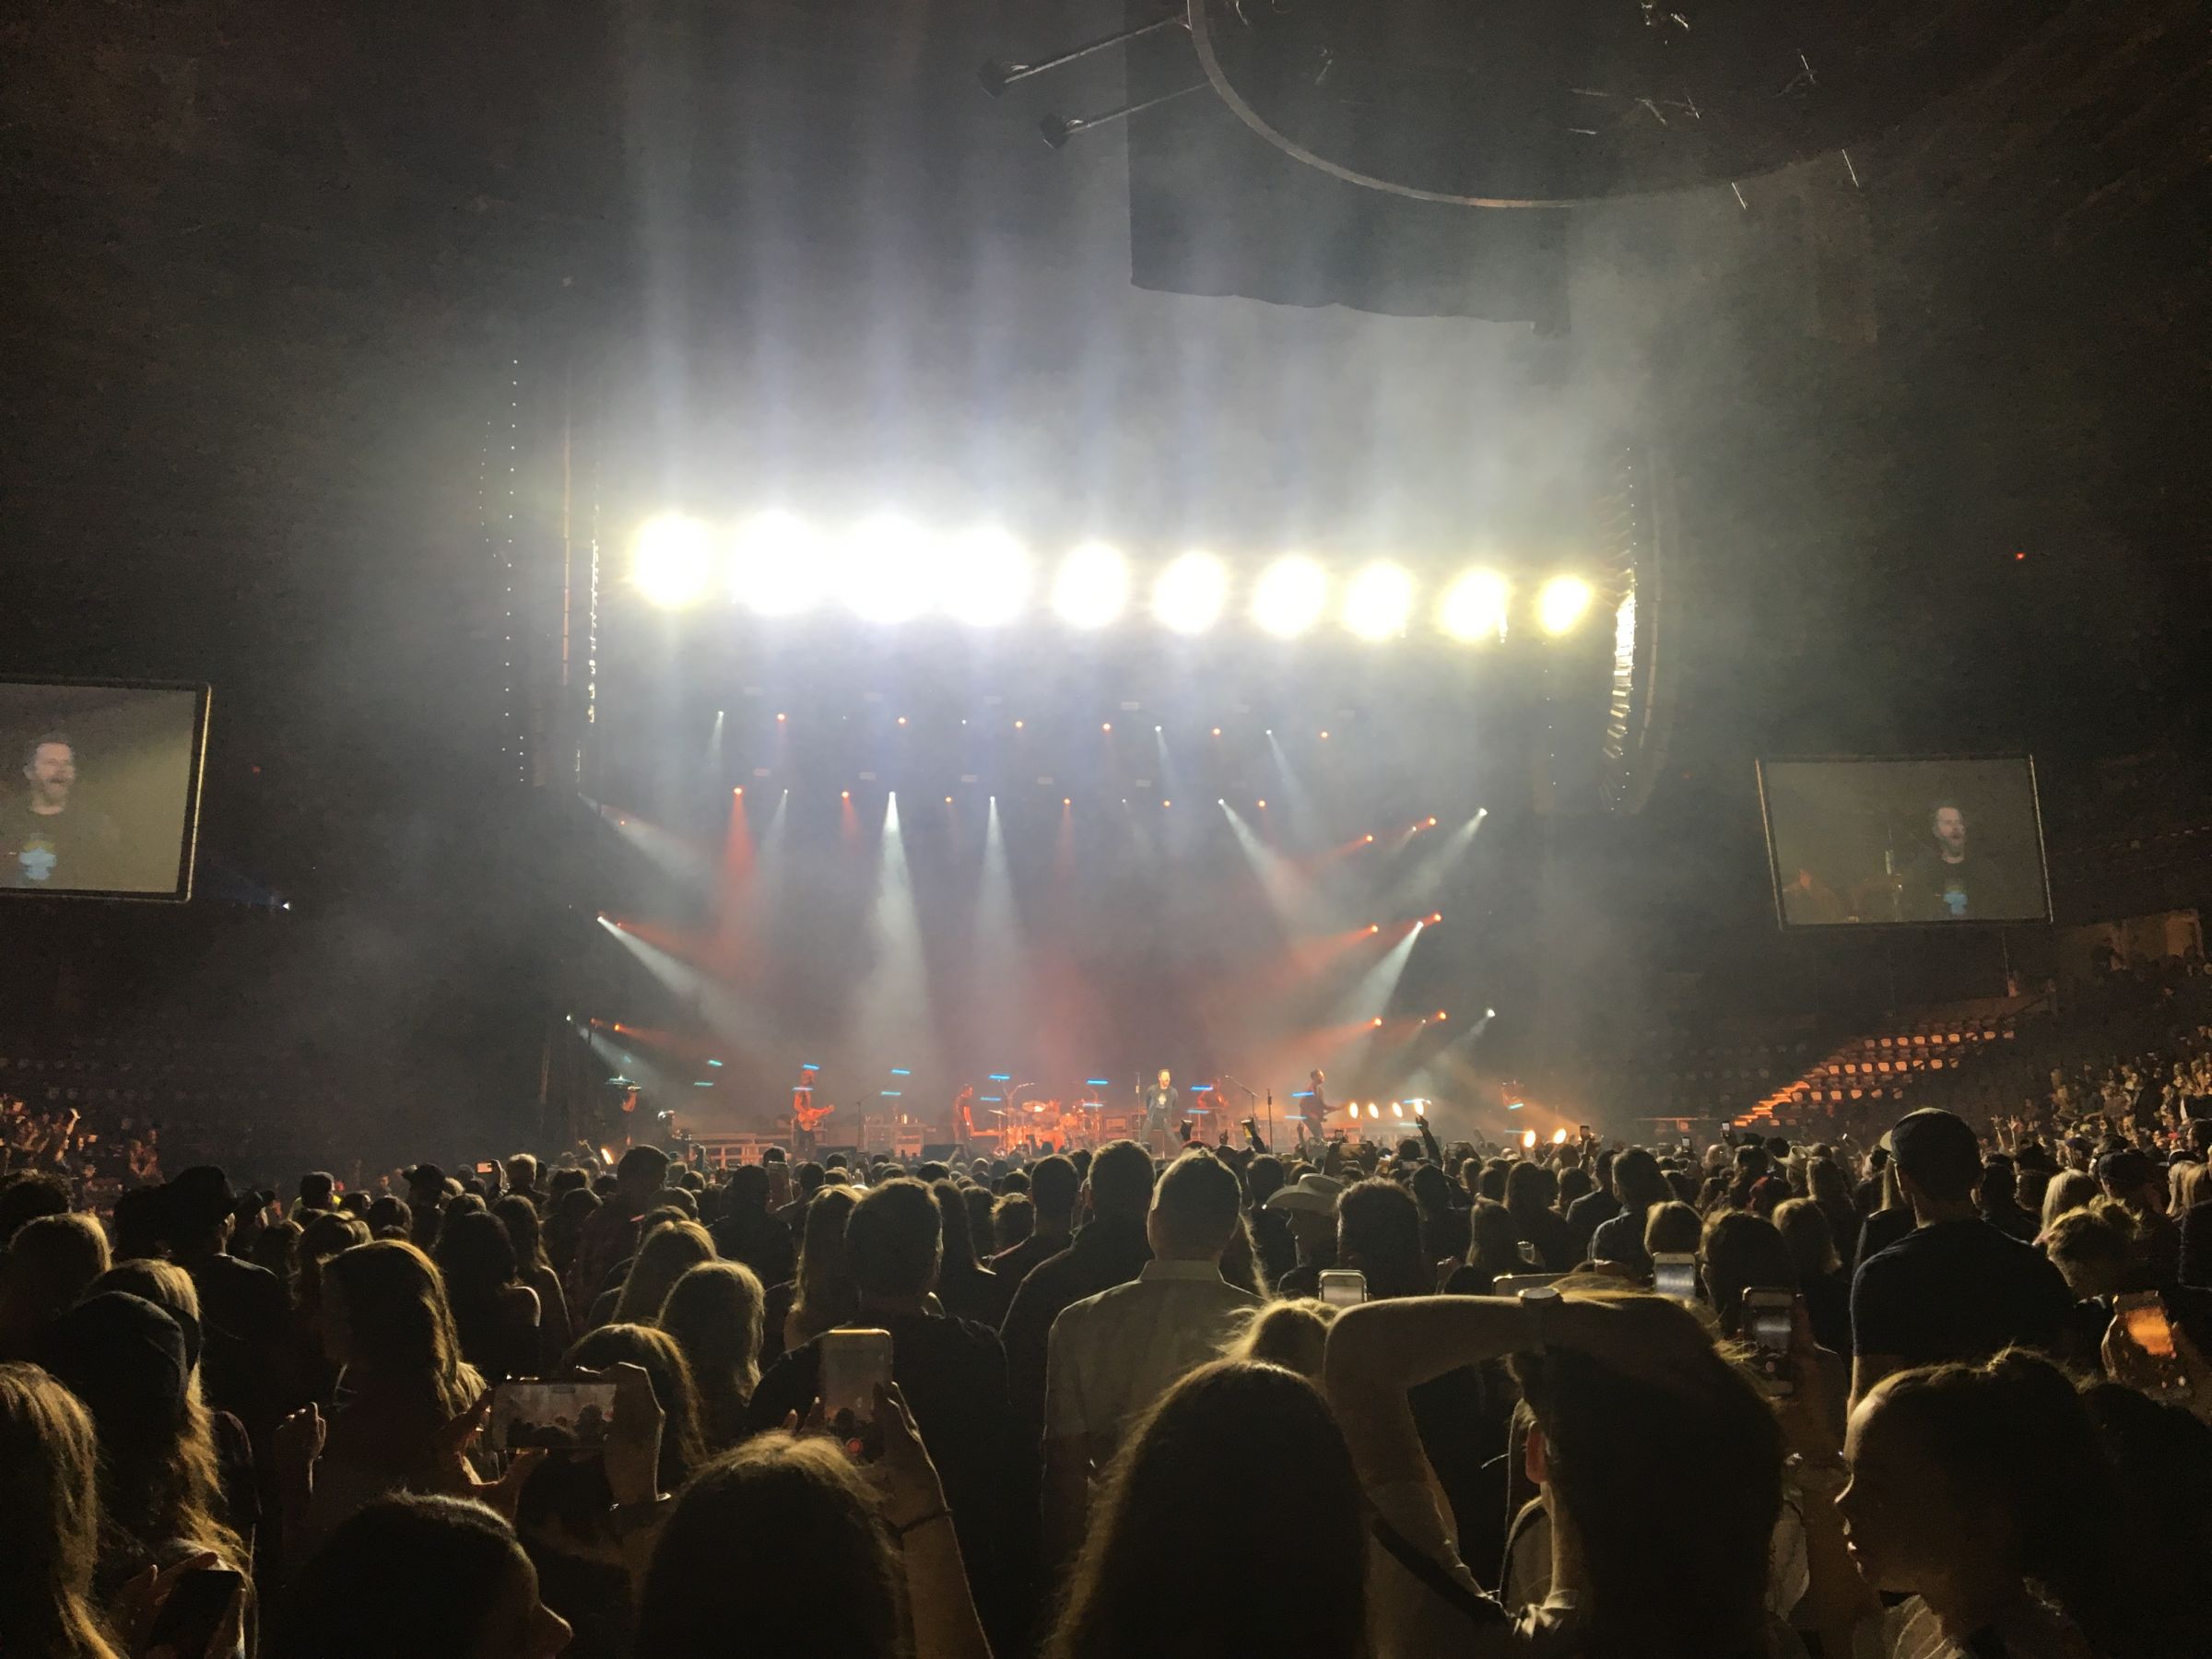 floor, row 20 seat view  for concert - scotiabank saddledome